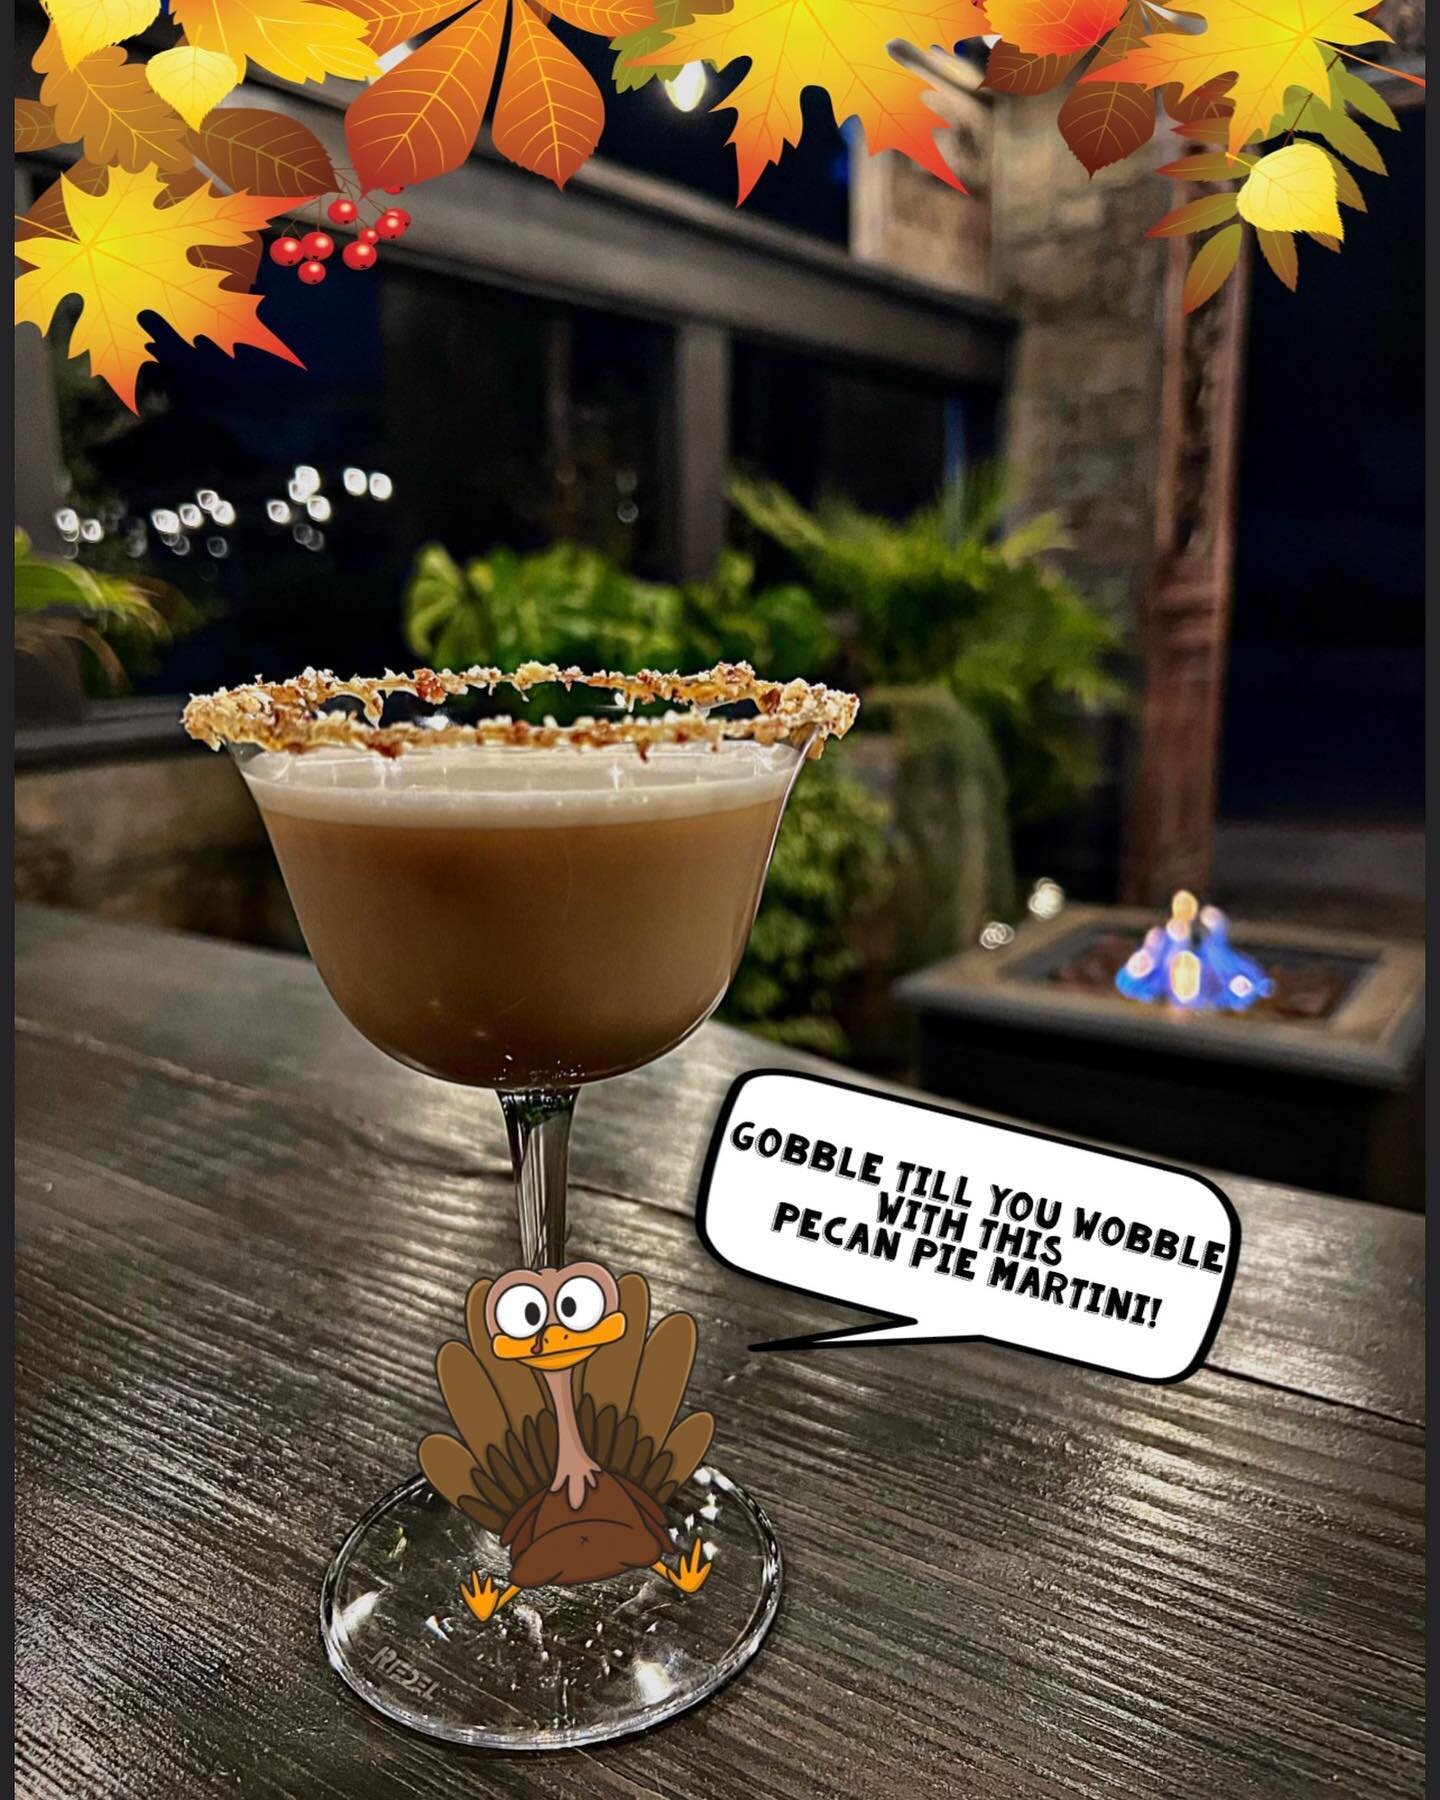 We will be closed Thanksgiving Day to feast with our families, but don&rsquo;t you worry! 
We will be open Friday &amp; Saturday for your pecan pie martini &amp; lobster feasting needs!